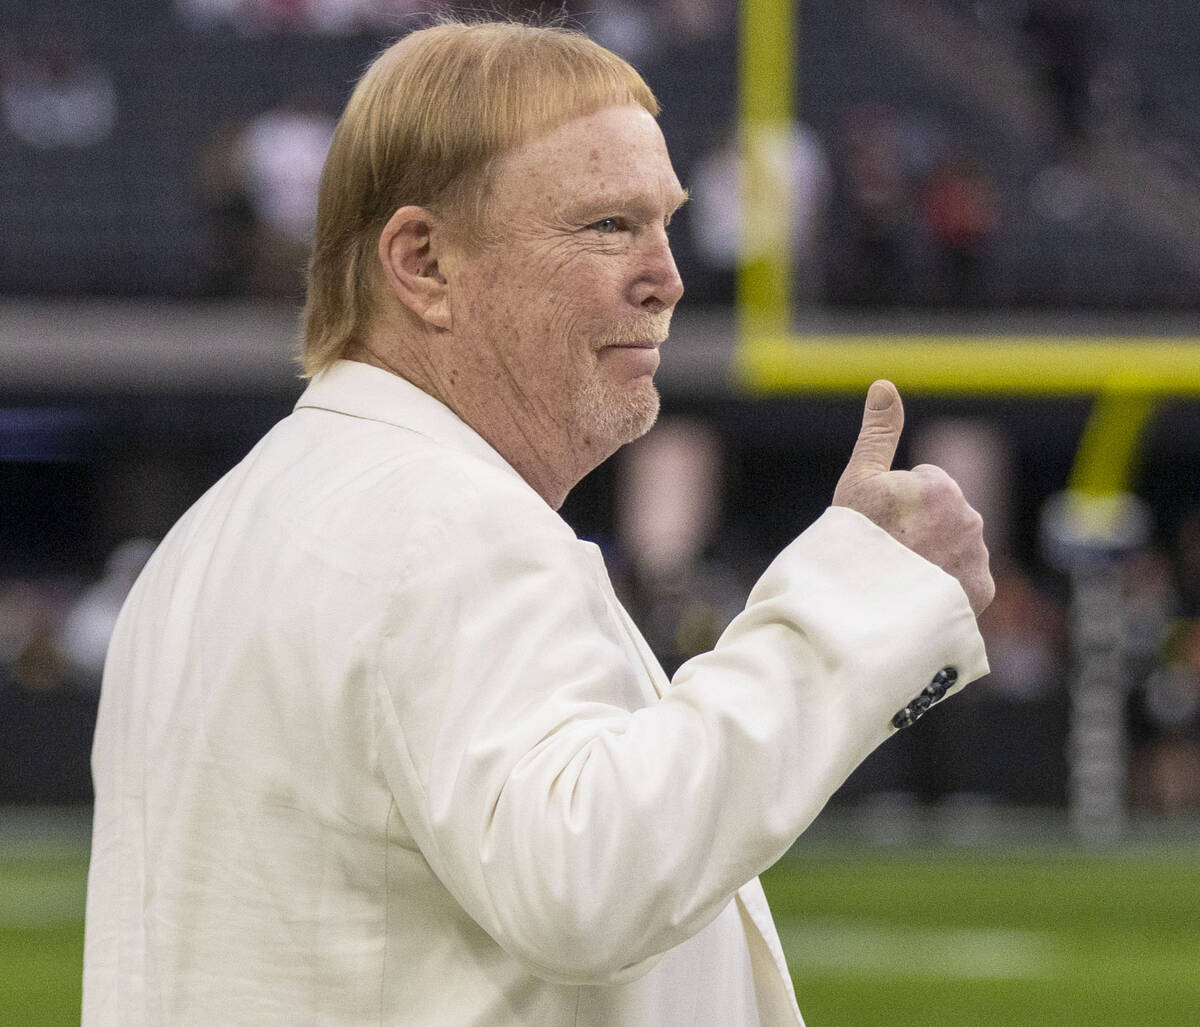 Raiders owner Mark Davis gives a thumbs up as the team warms up before an NFL game against the ...